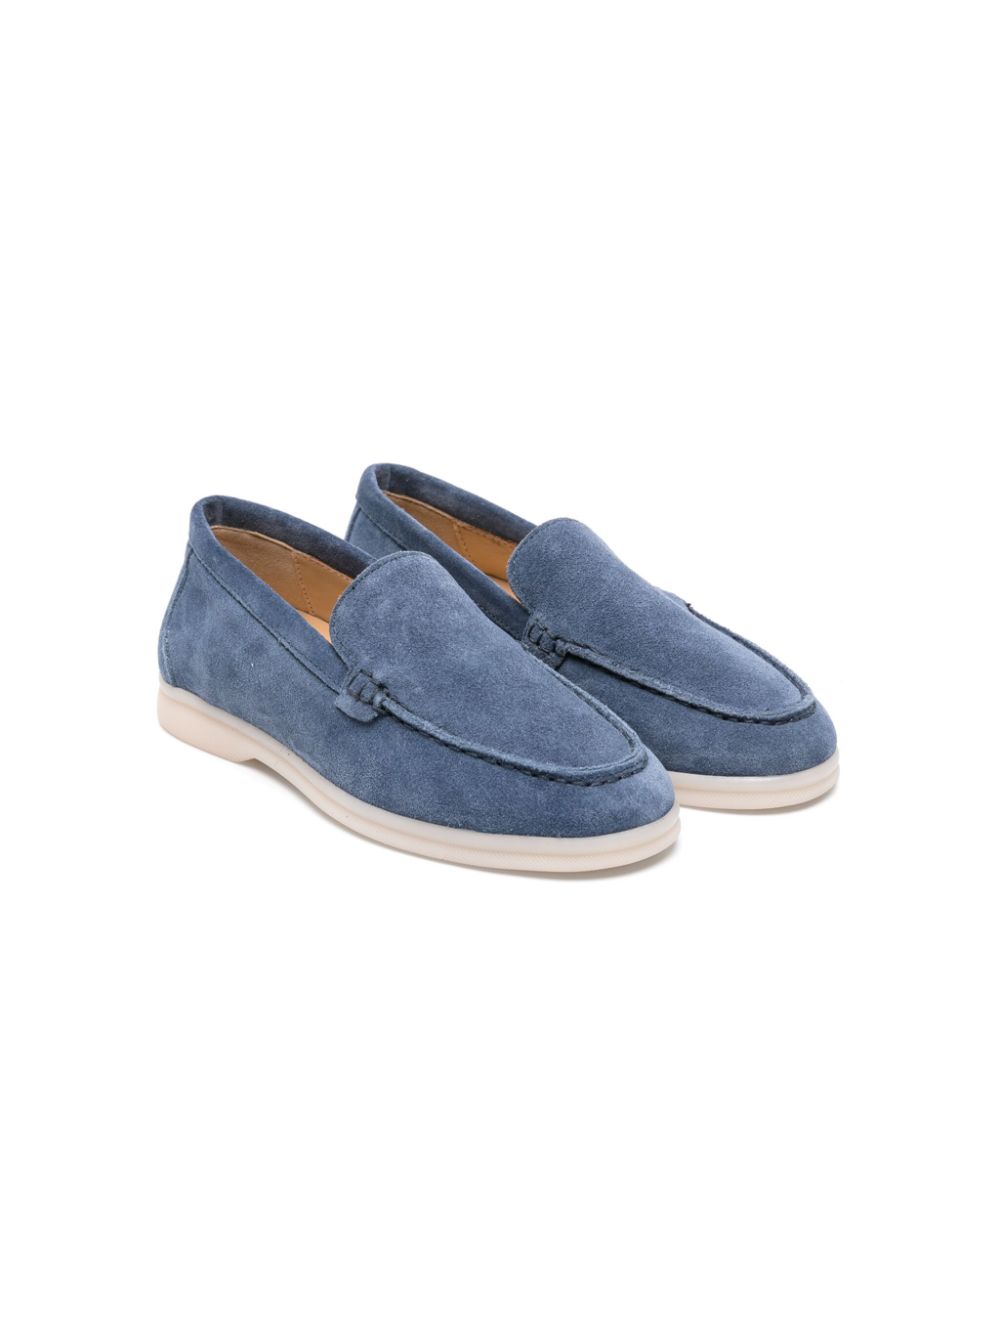 SCAROSSO LUDOVICA SUEDE LOAFERS